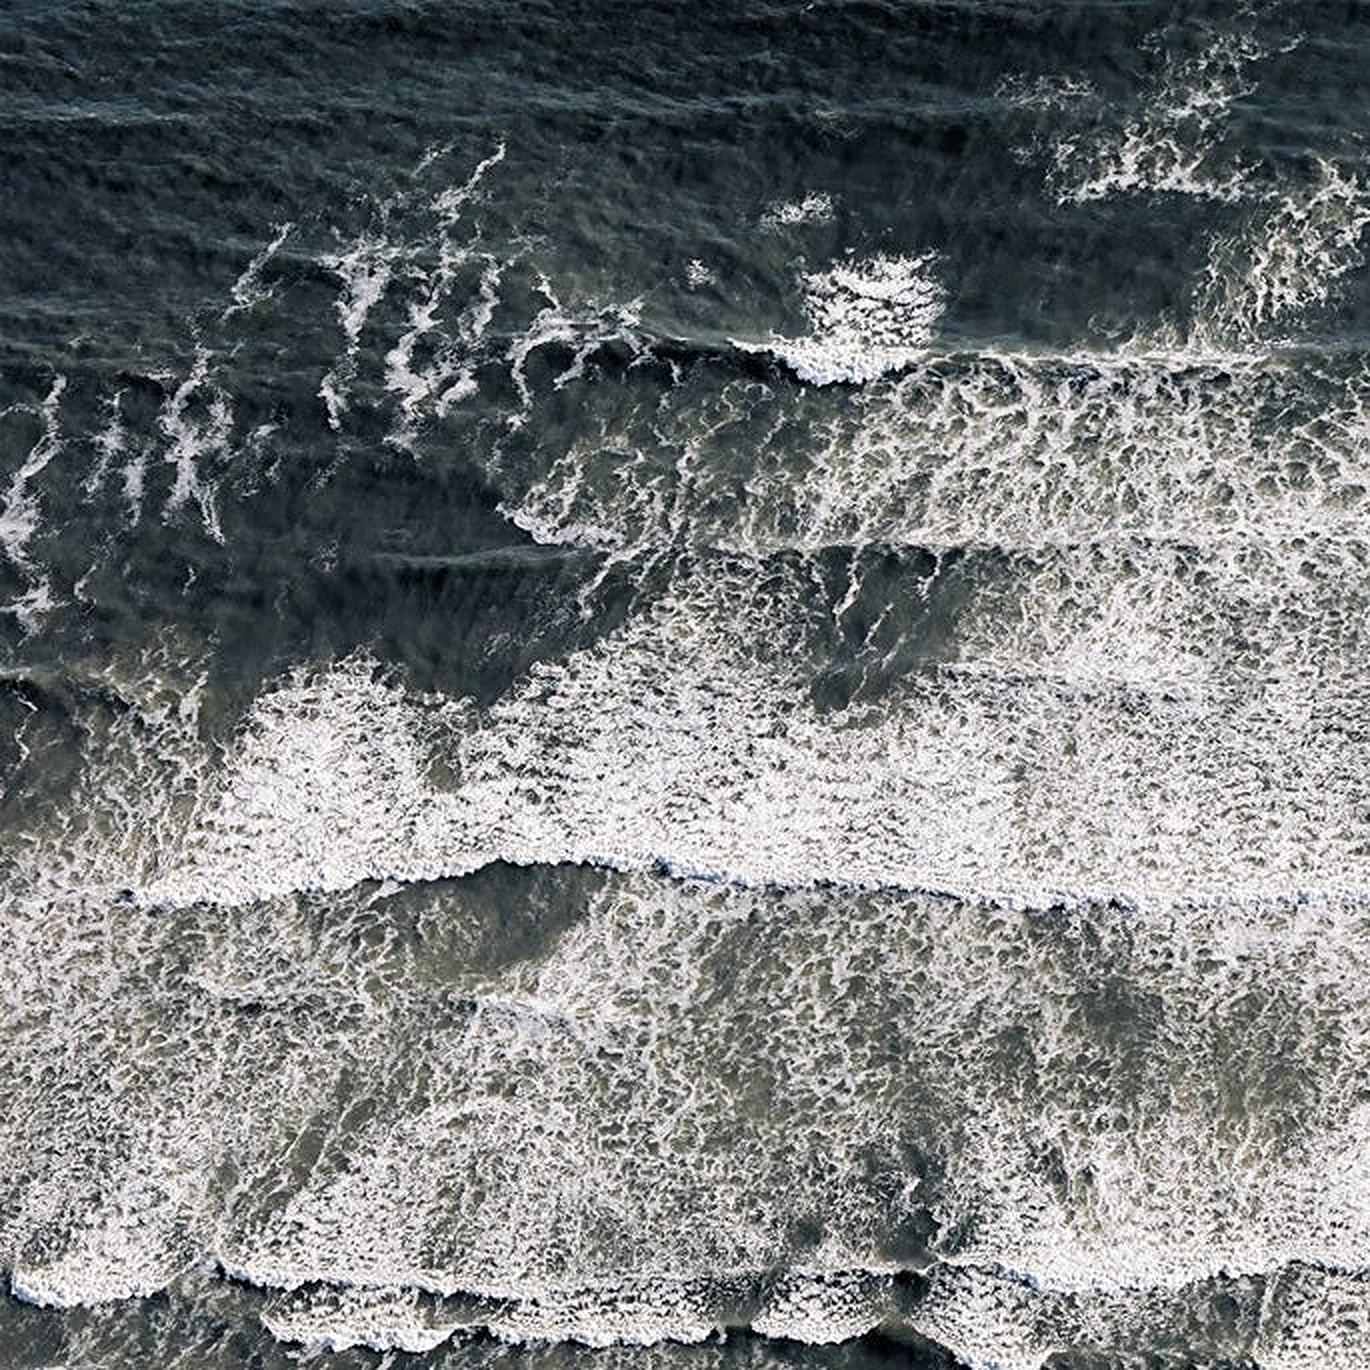 Please bear in mind that all prints are produced to order and lead times are between 15-20 days.

Waves is a stunning Archival Inkjet Print by contemporary photographer Morgan Silk. 
It is available in an Edition of 25 in this size, and is sold